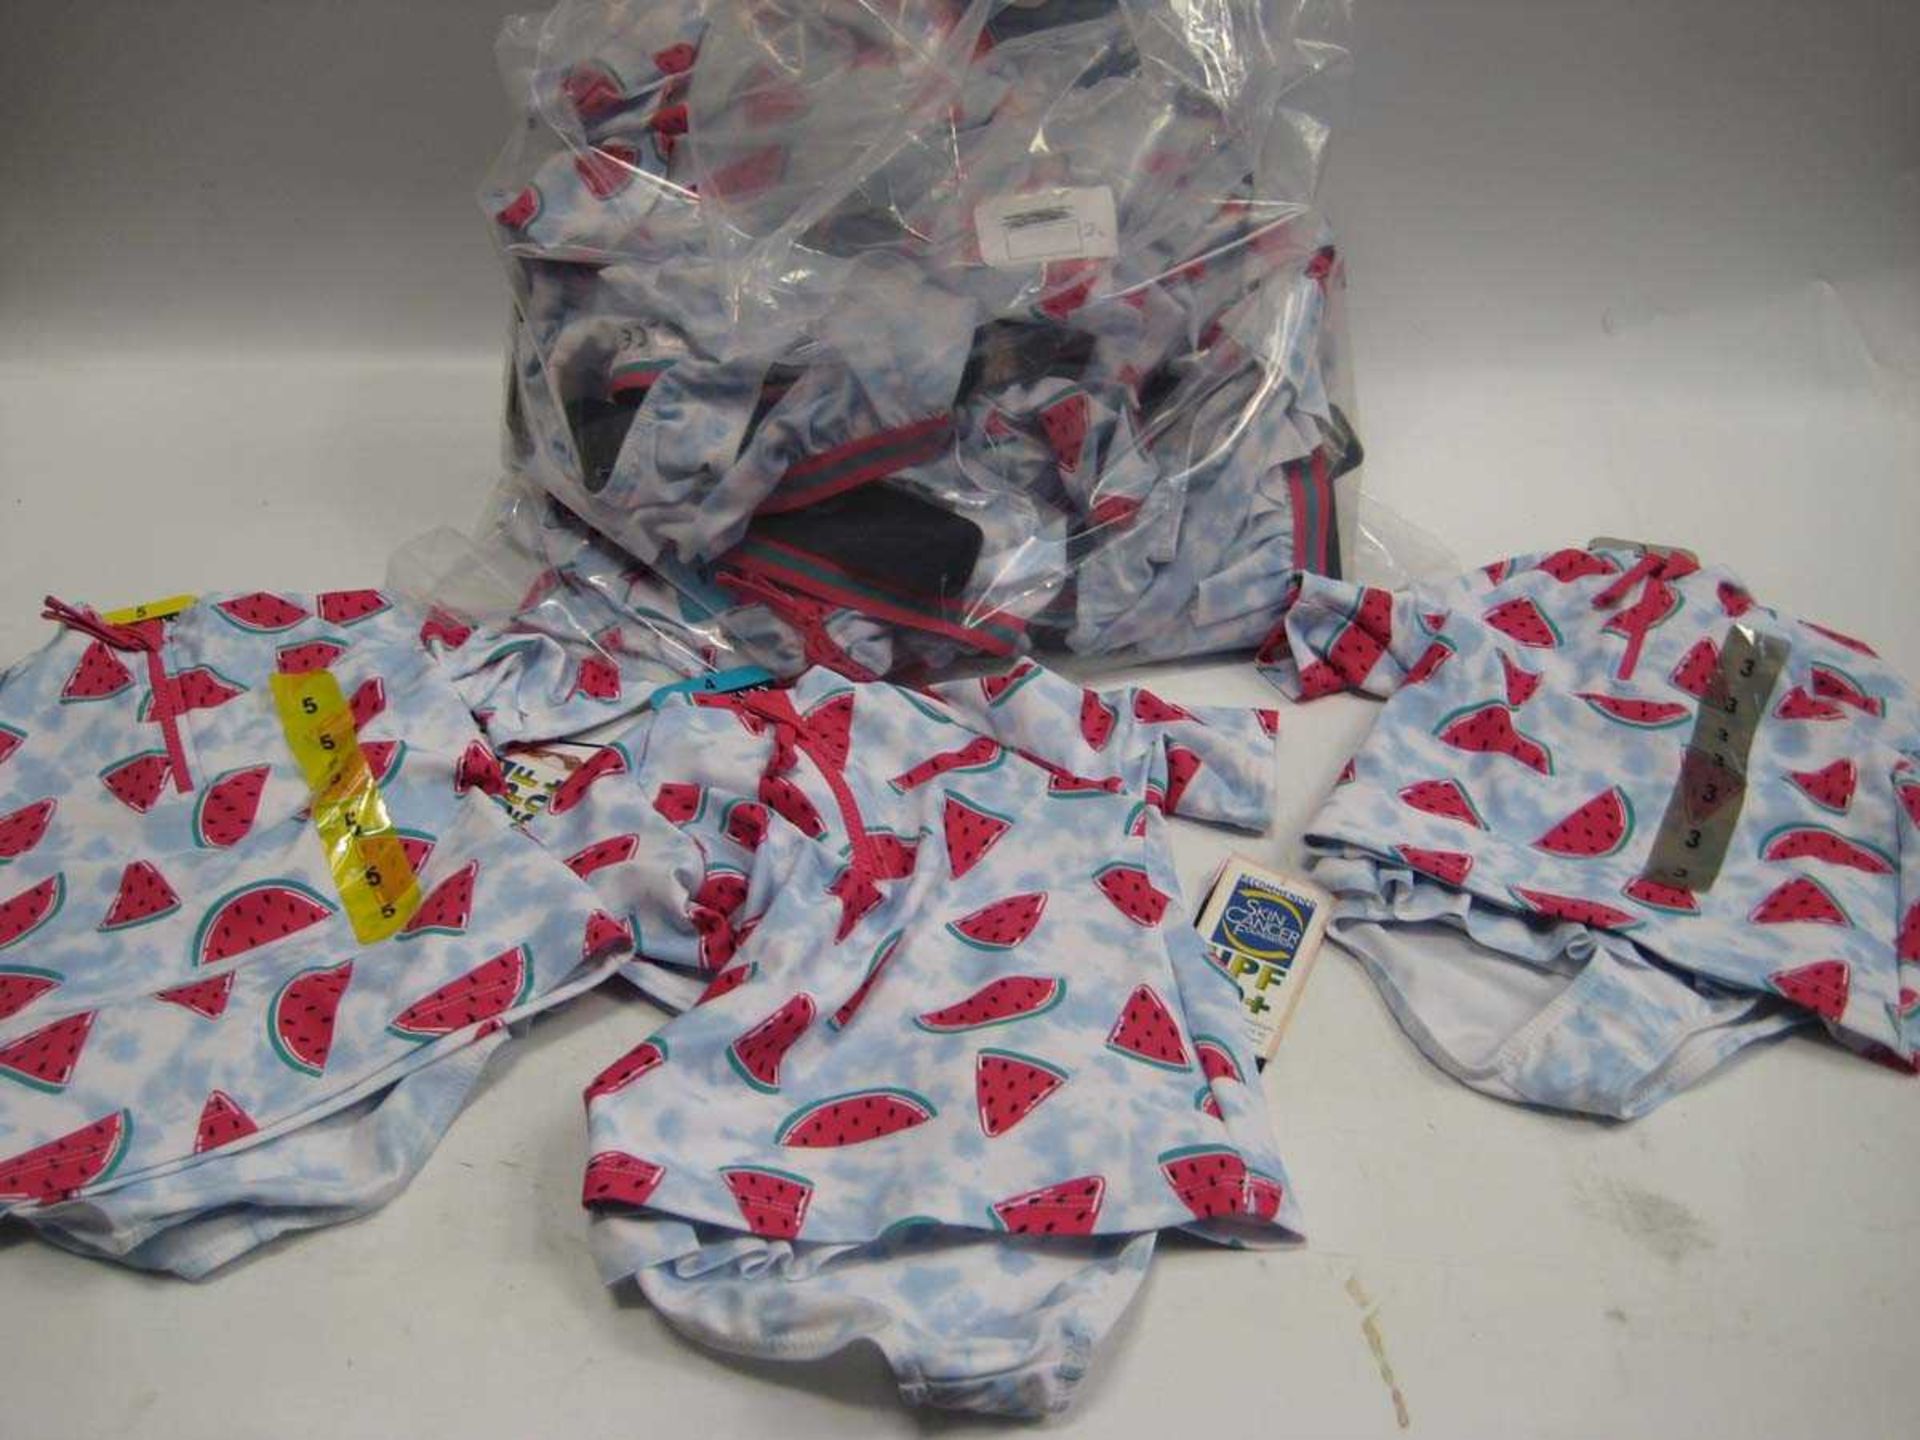 A bag containing 20x sets of Children's Swimwear in various styles.